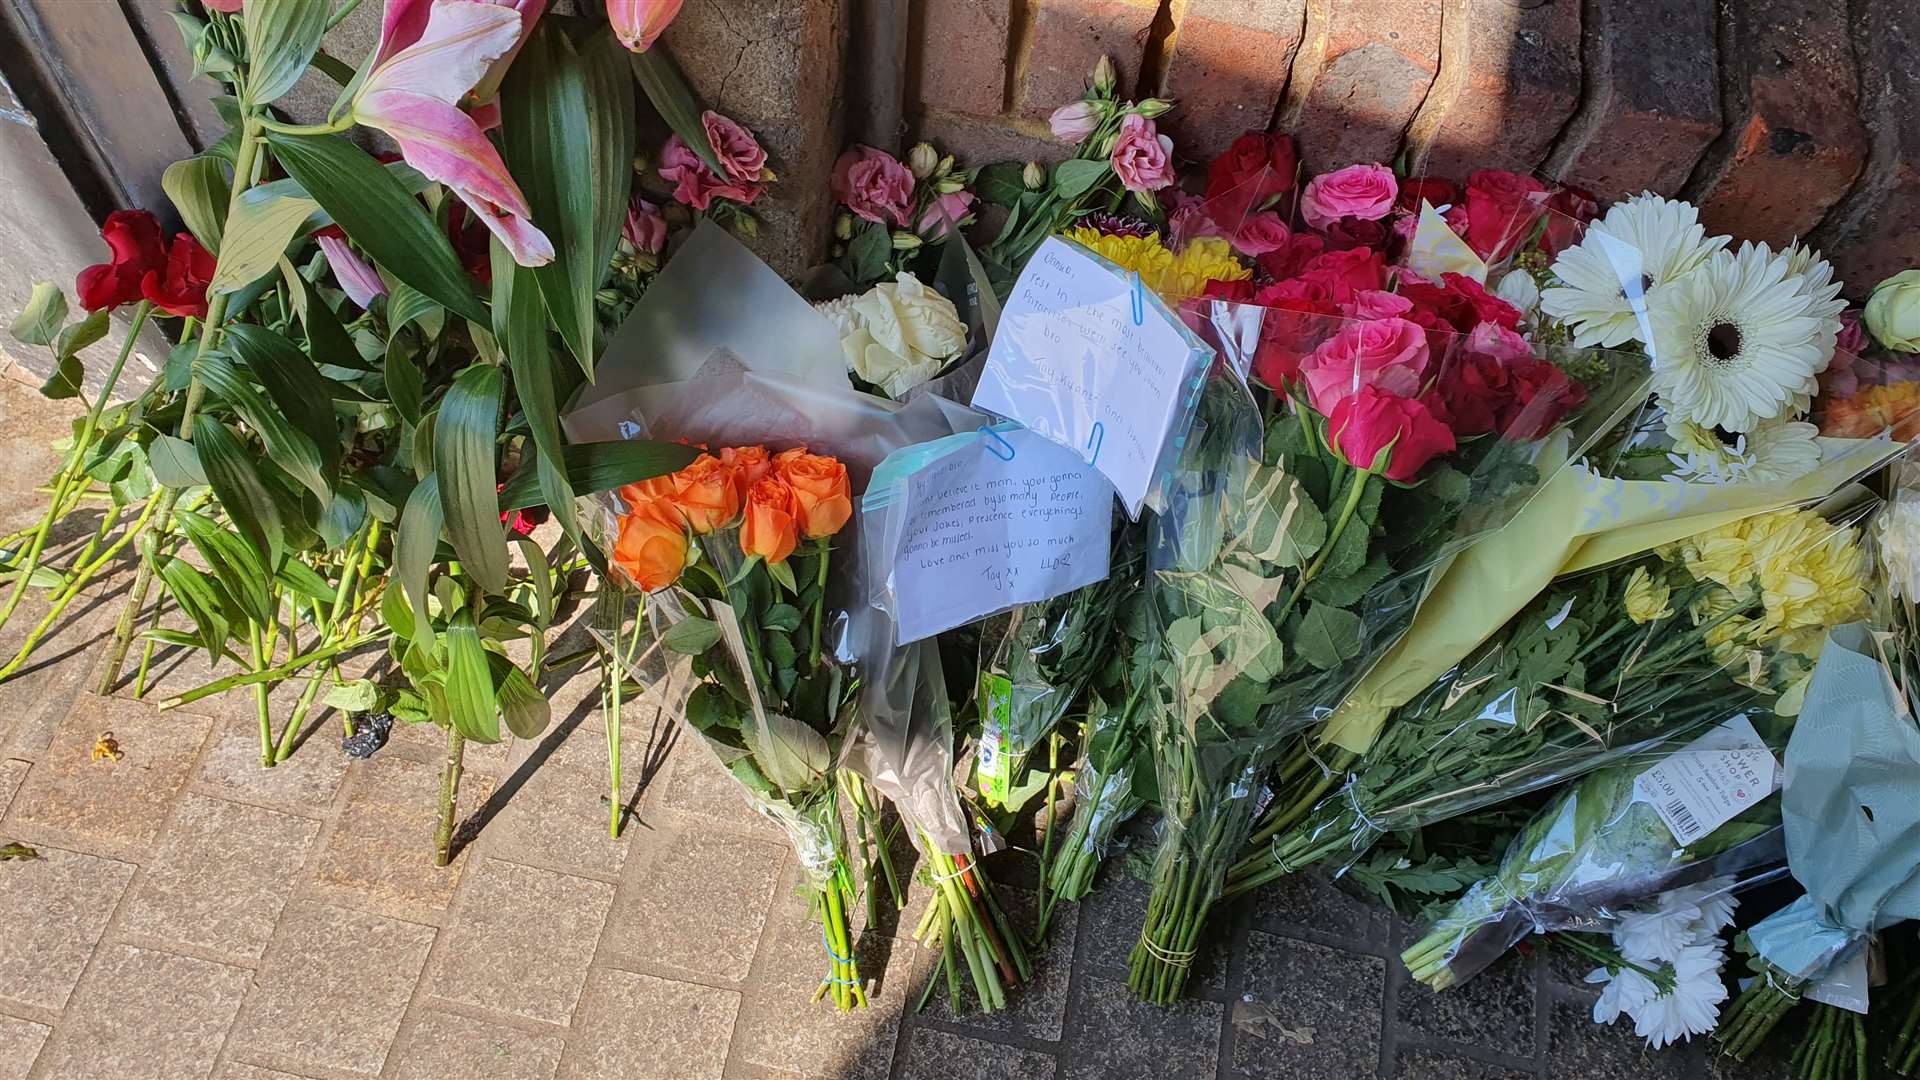 Tributes to an 18-year-old stabbing victim line the alleyway in Dartford High Street